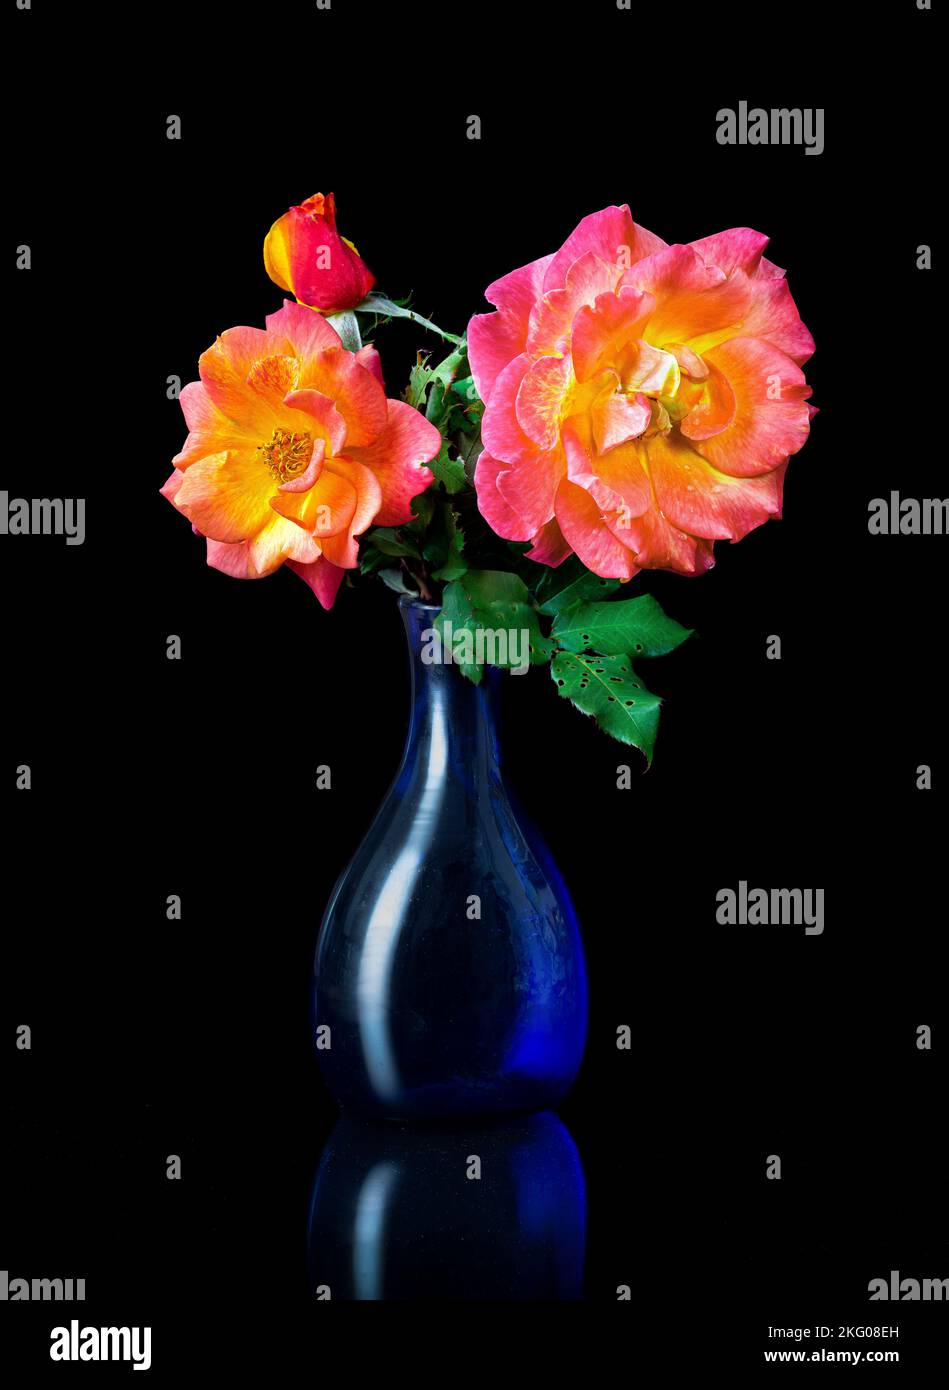 A vase of roses. Stock Photo